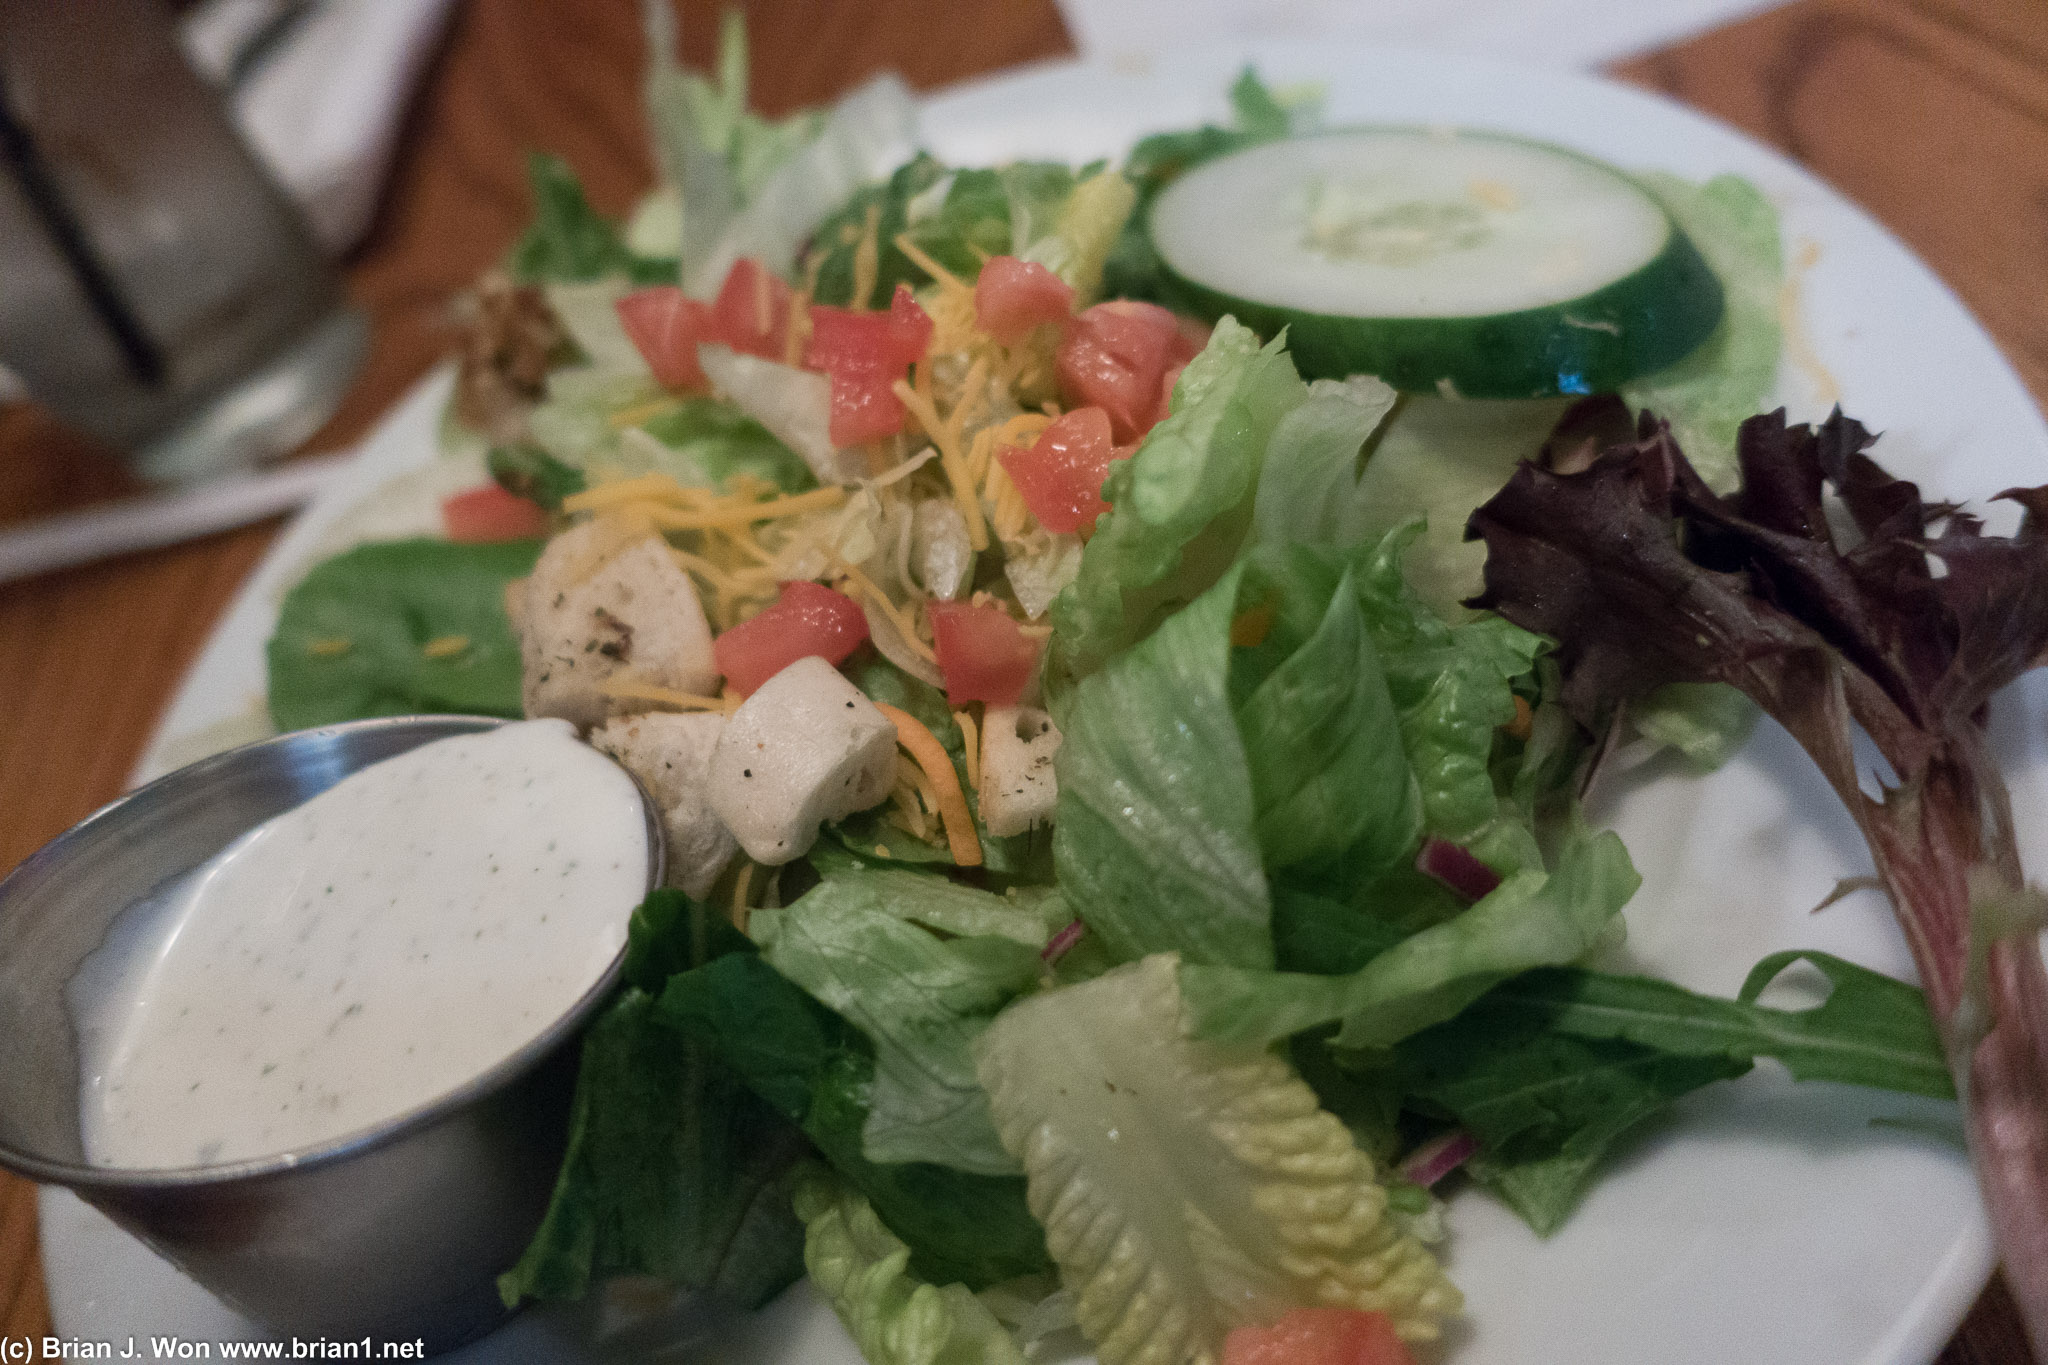 Typical chain steakhouse salad.